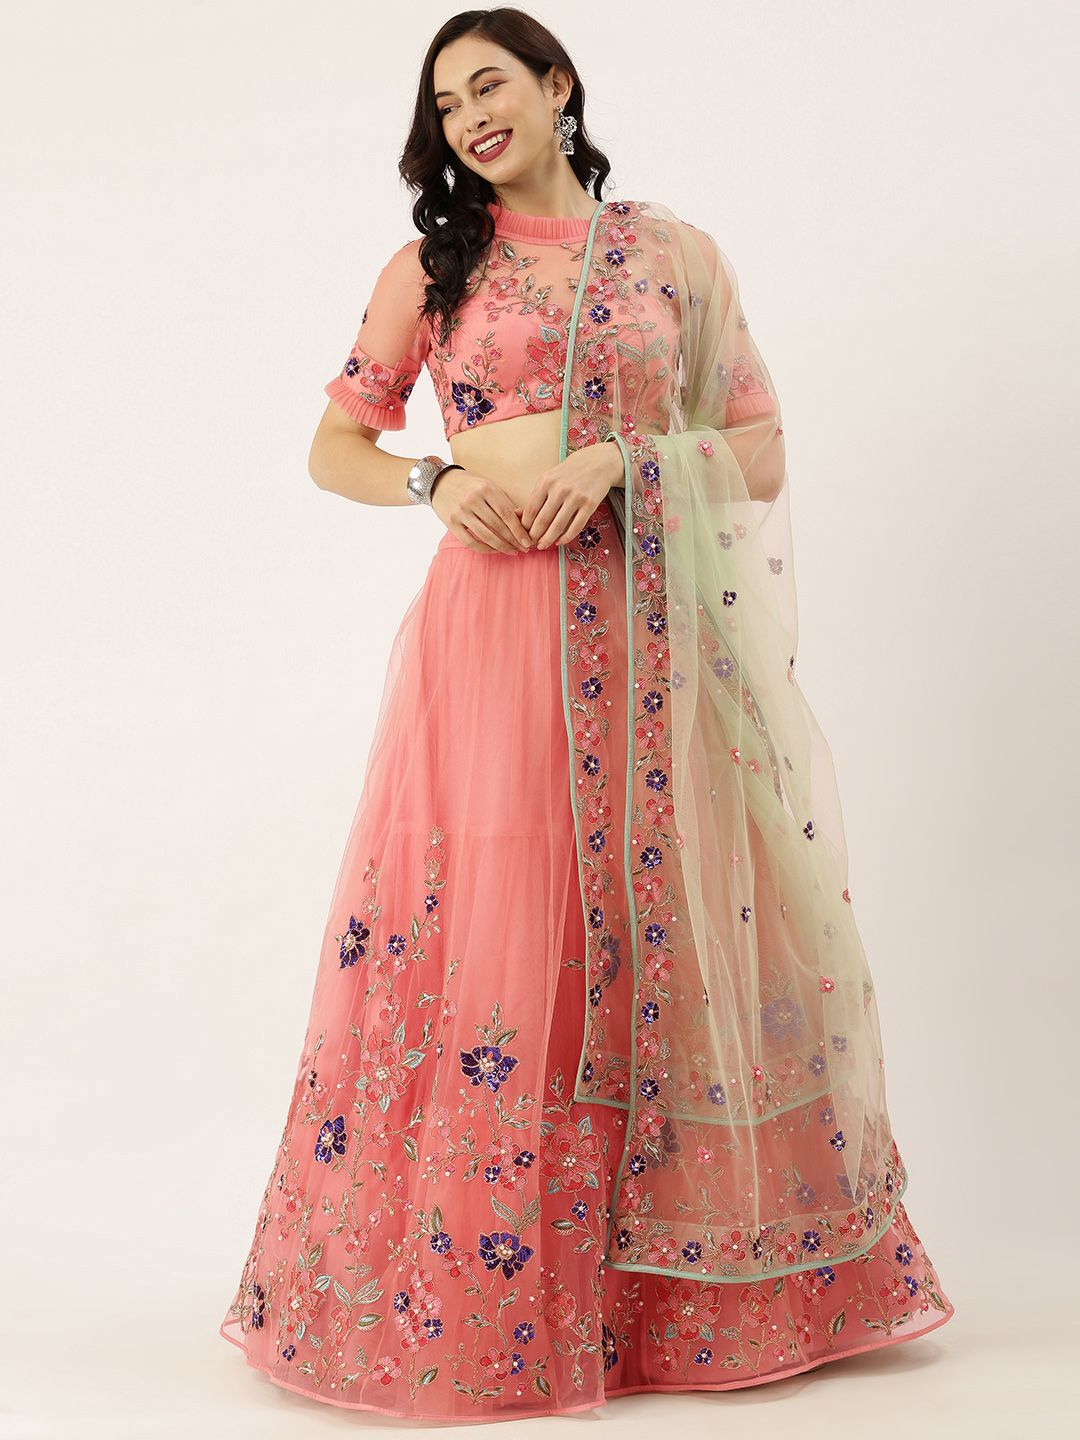 panchhi Peach-Coloured Embroidered Semi-Stitched Lehenga & Unstitched Blouse With Dupatta Price in India